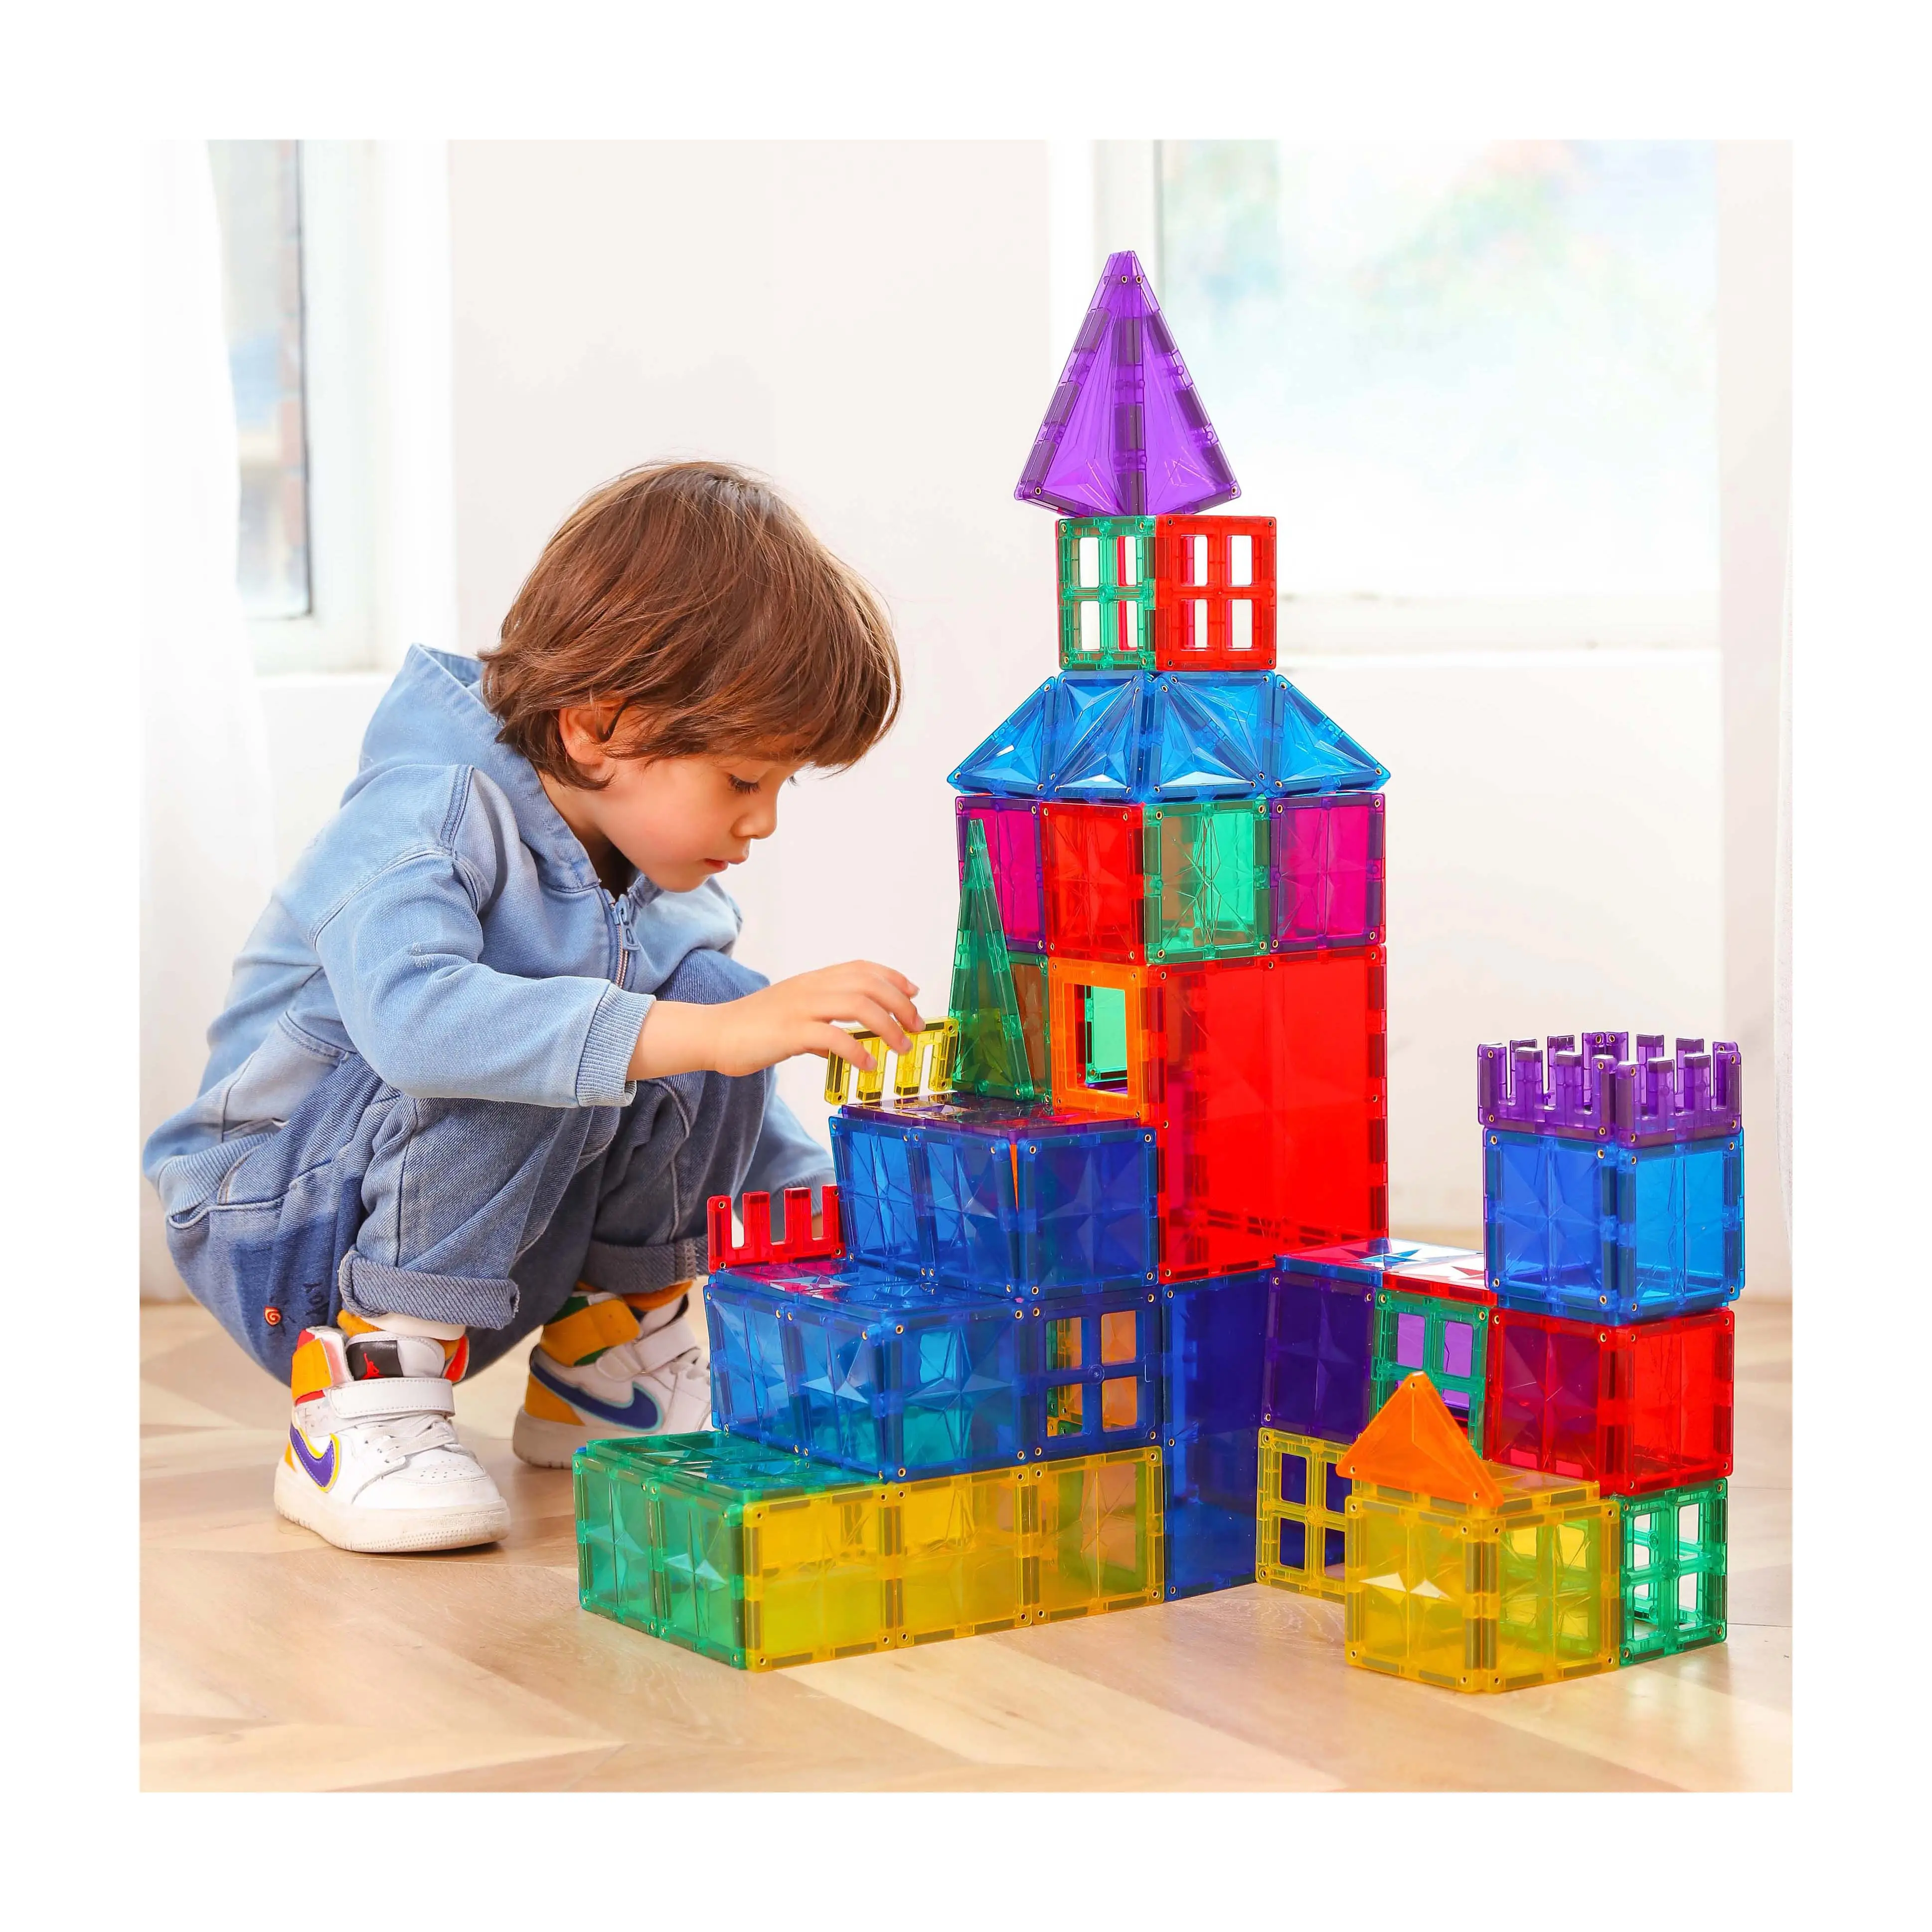 Mntl 182-piece Magnetic Building Tiles Best Price Educational Magnetic Building Block Toy For Kids